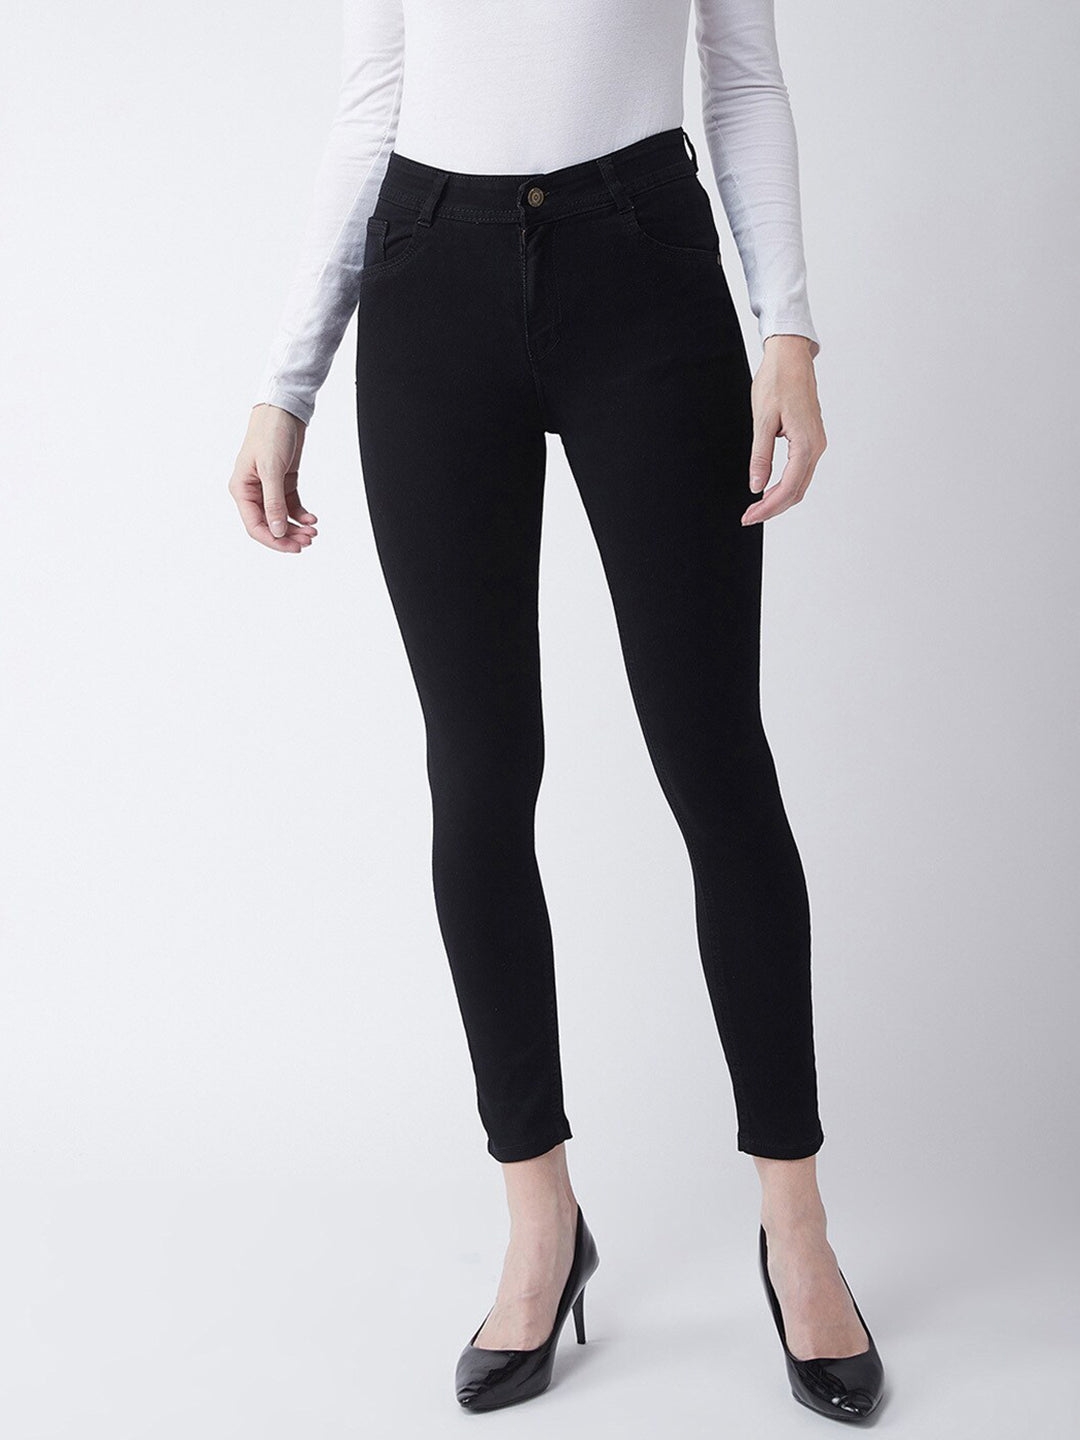 Black Slim Fit High Rise Clean Look Cropped Length Stretchable Denim Jeans